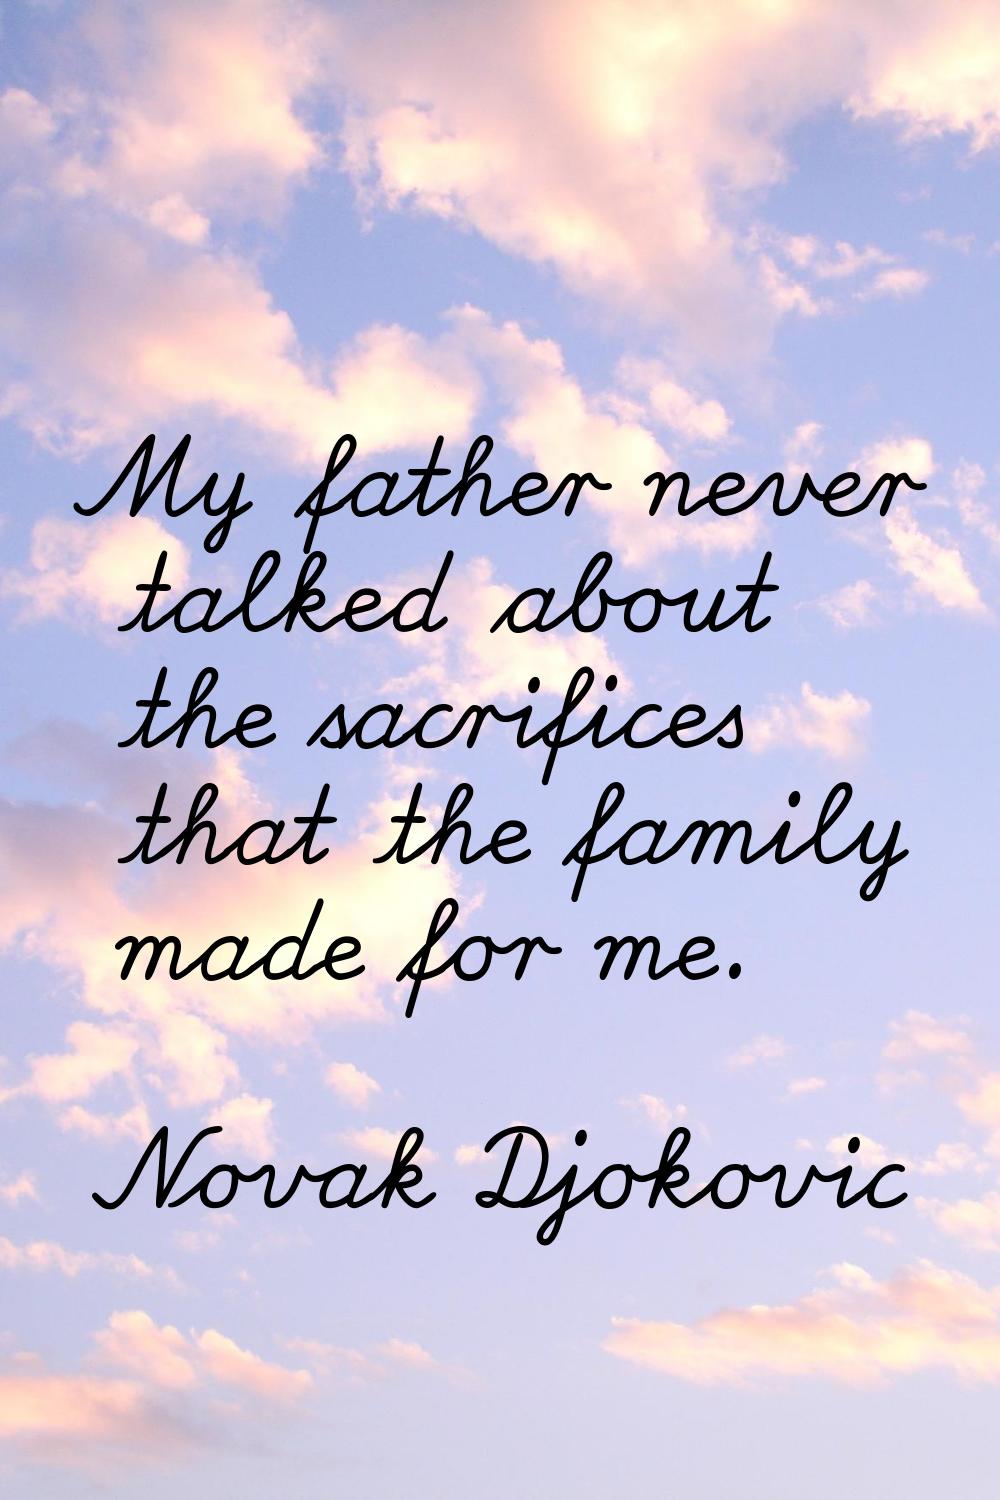 My father never talked about the sacrifices that the family made for me.